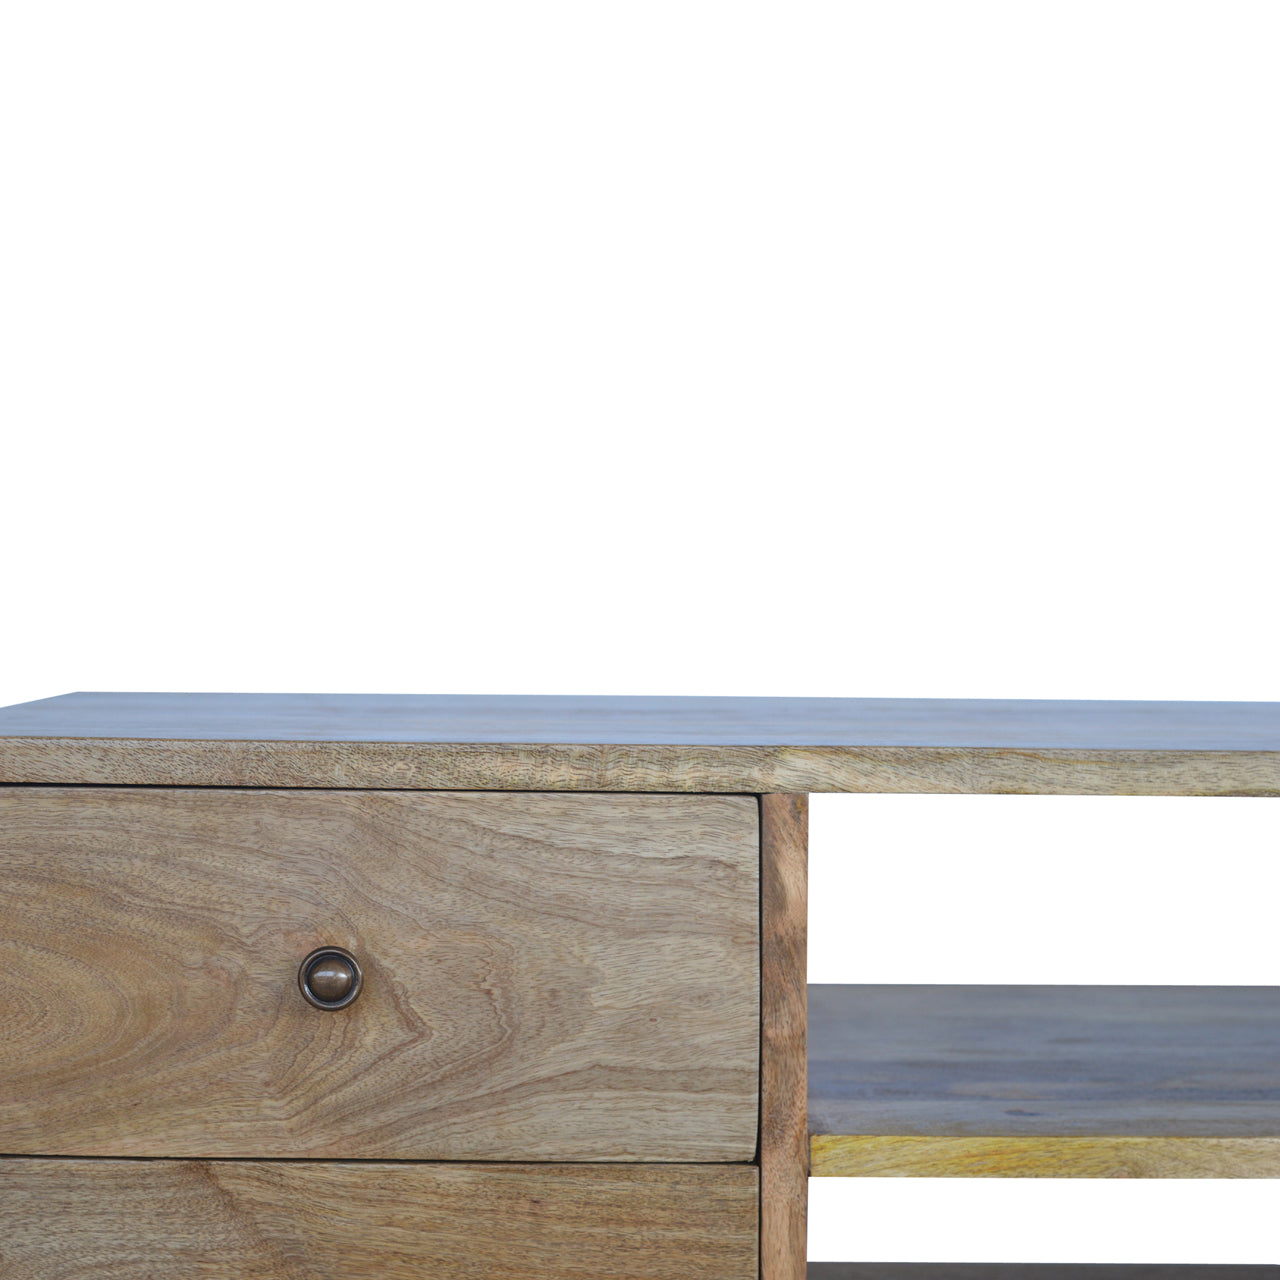 Nordic wooden TV stand with 4 drawers in rustic natural oak-ish finish | malletandplane.com